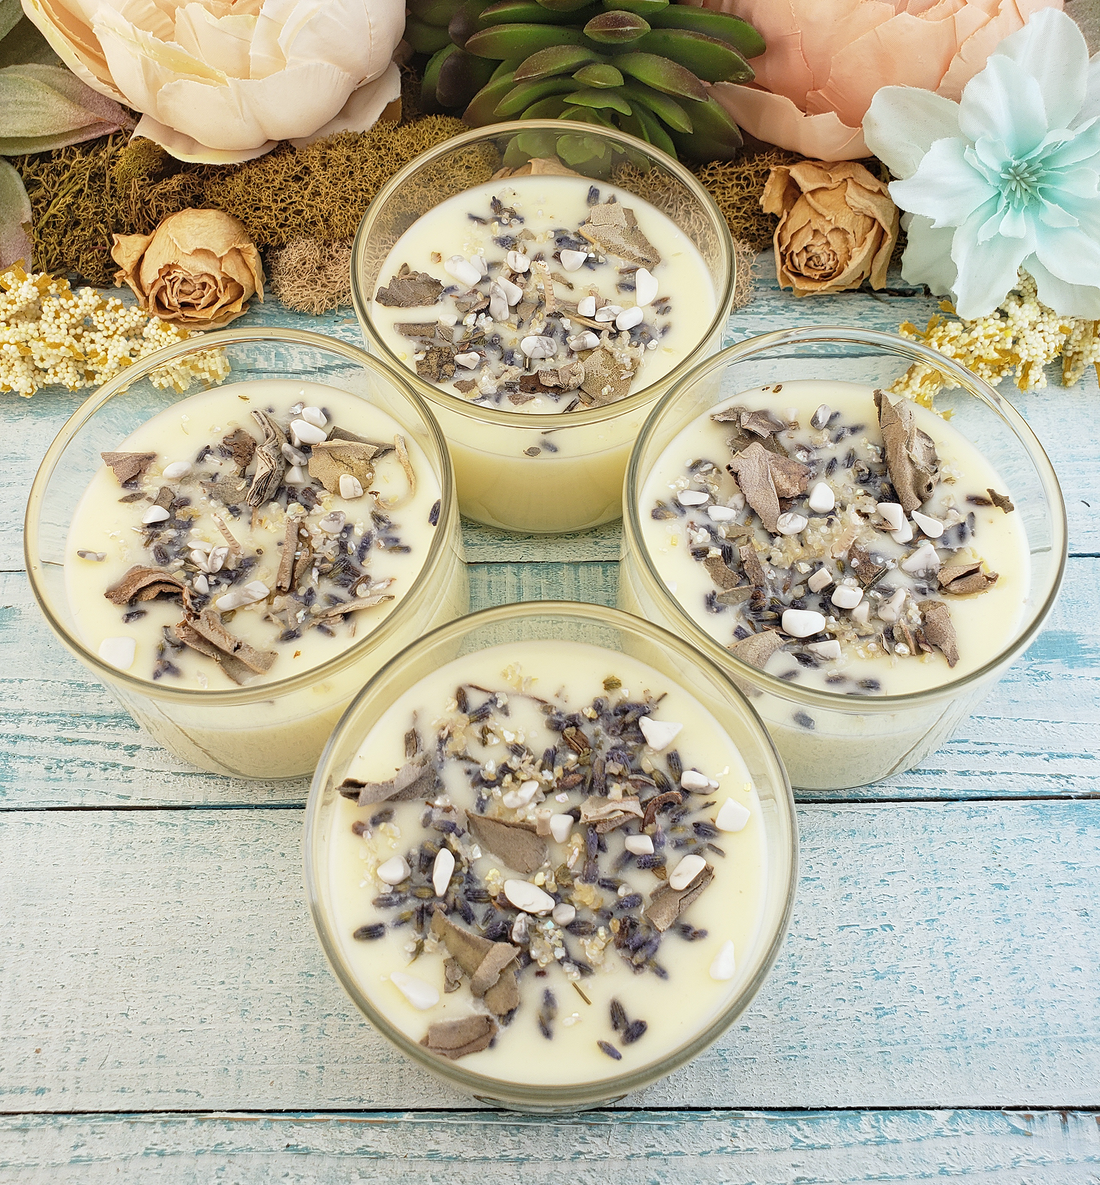 Stress Relief - Coconut Soy Wax Handmade Scented Tumbler Candle - Scented with Essential Oils - Dried Herbs White Sage Lavender - Crystal Chips Howlite Mica